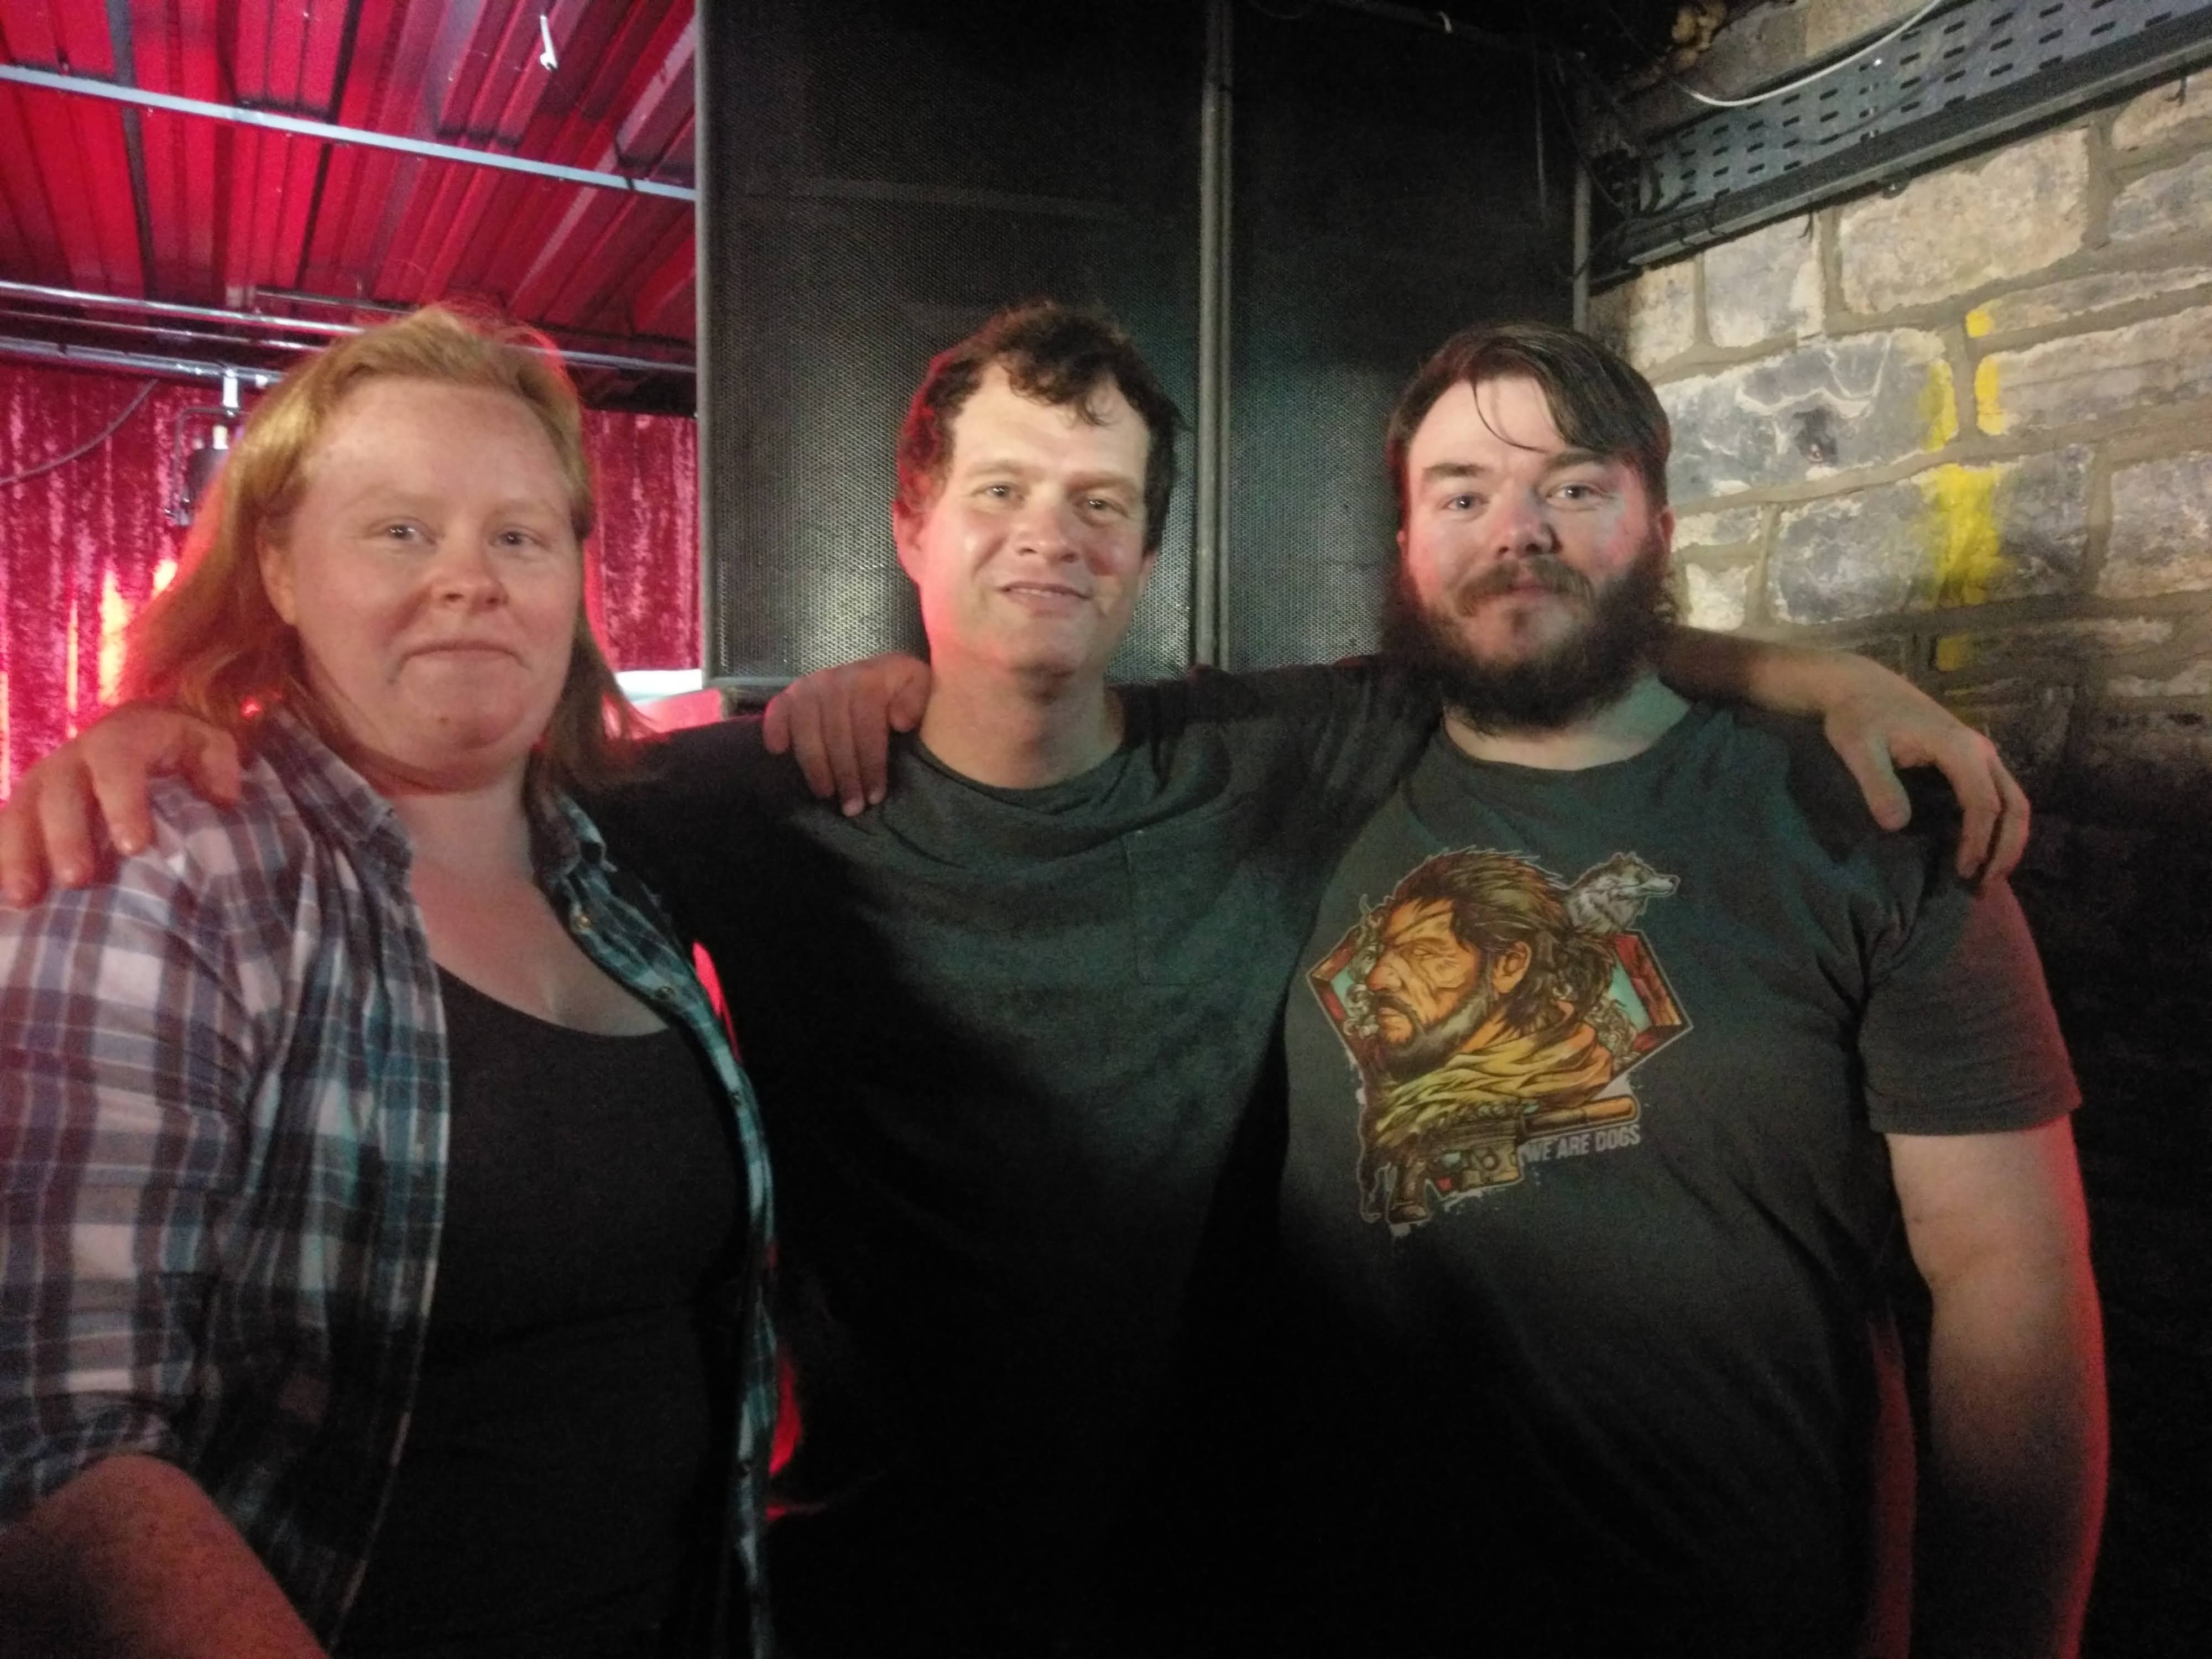 Clare and Shane meeting the lead singer of one of their favorite bands, Electric Six